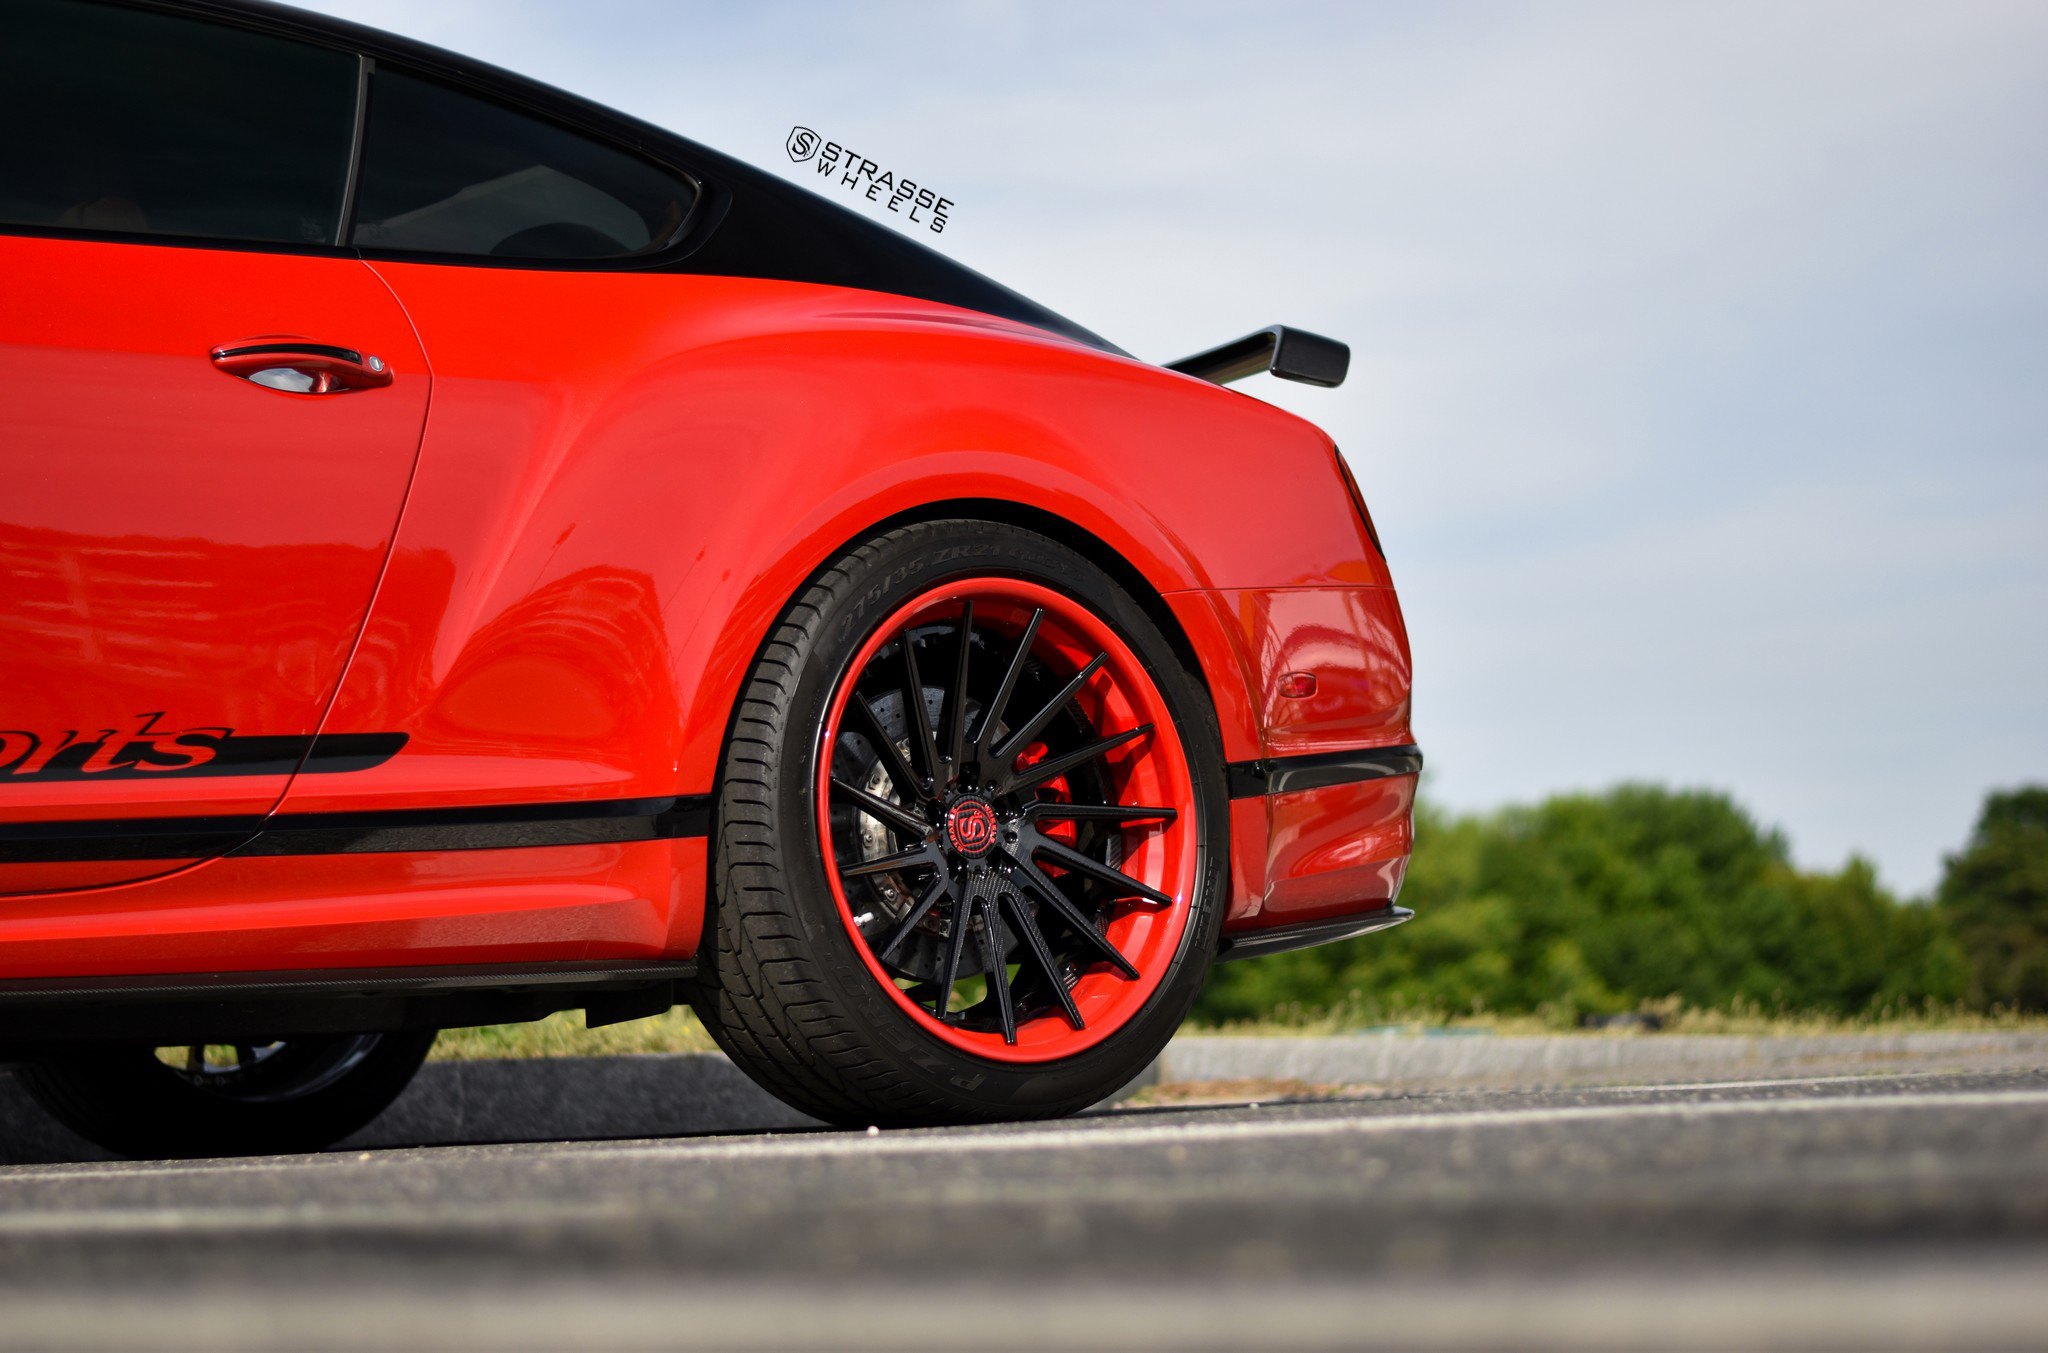 Pirelli Tires on Custom Red Bentley Continental - Photo by Strasse Wheels